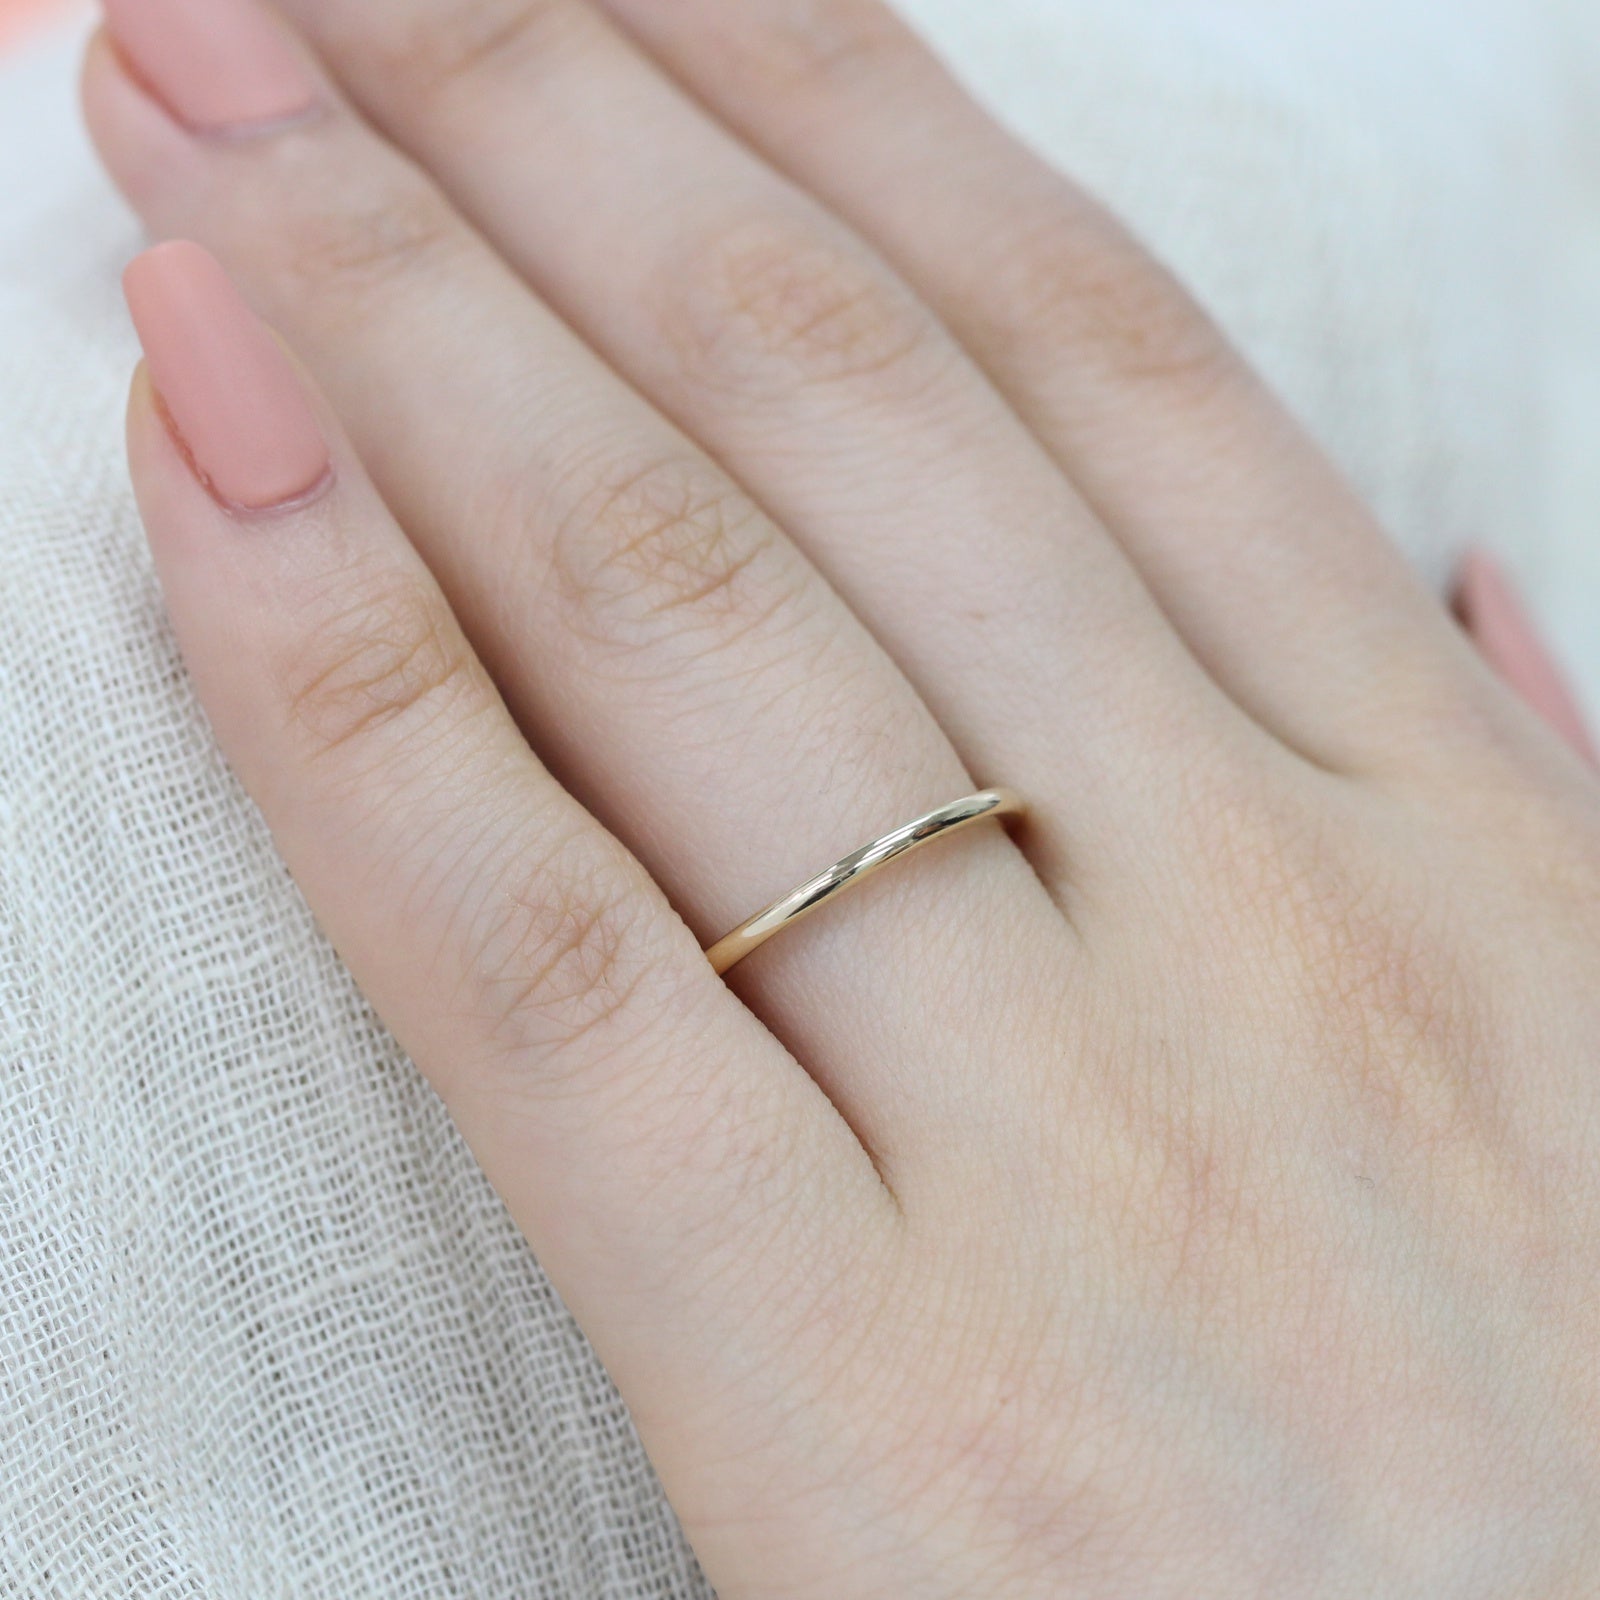 Plain gold wedding band solid 14k yellow gold ring by la more design jewelry